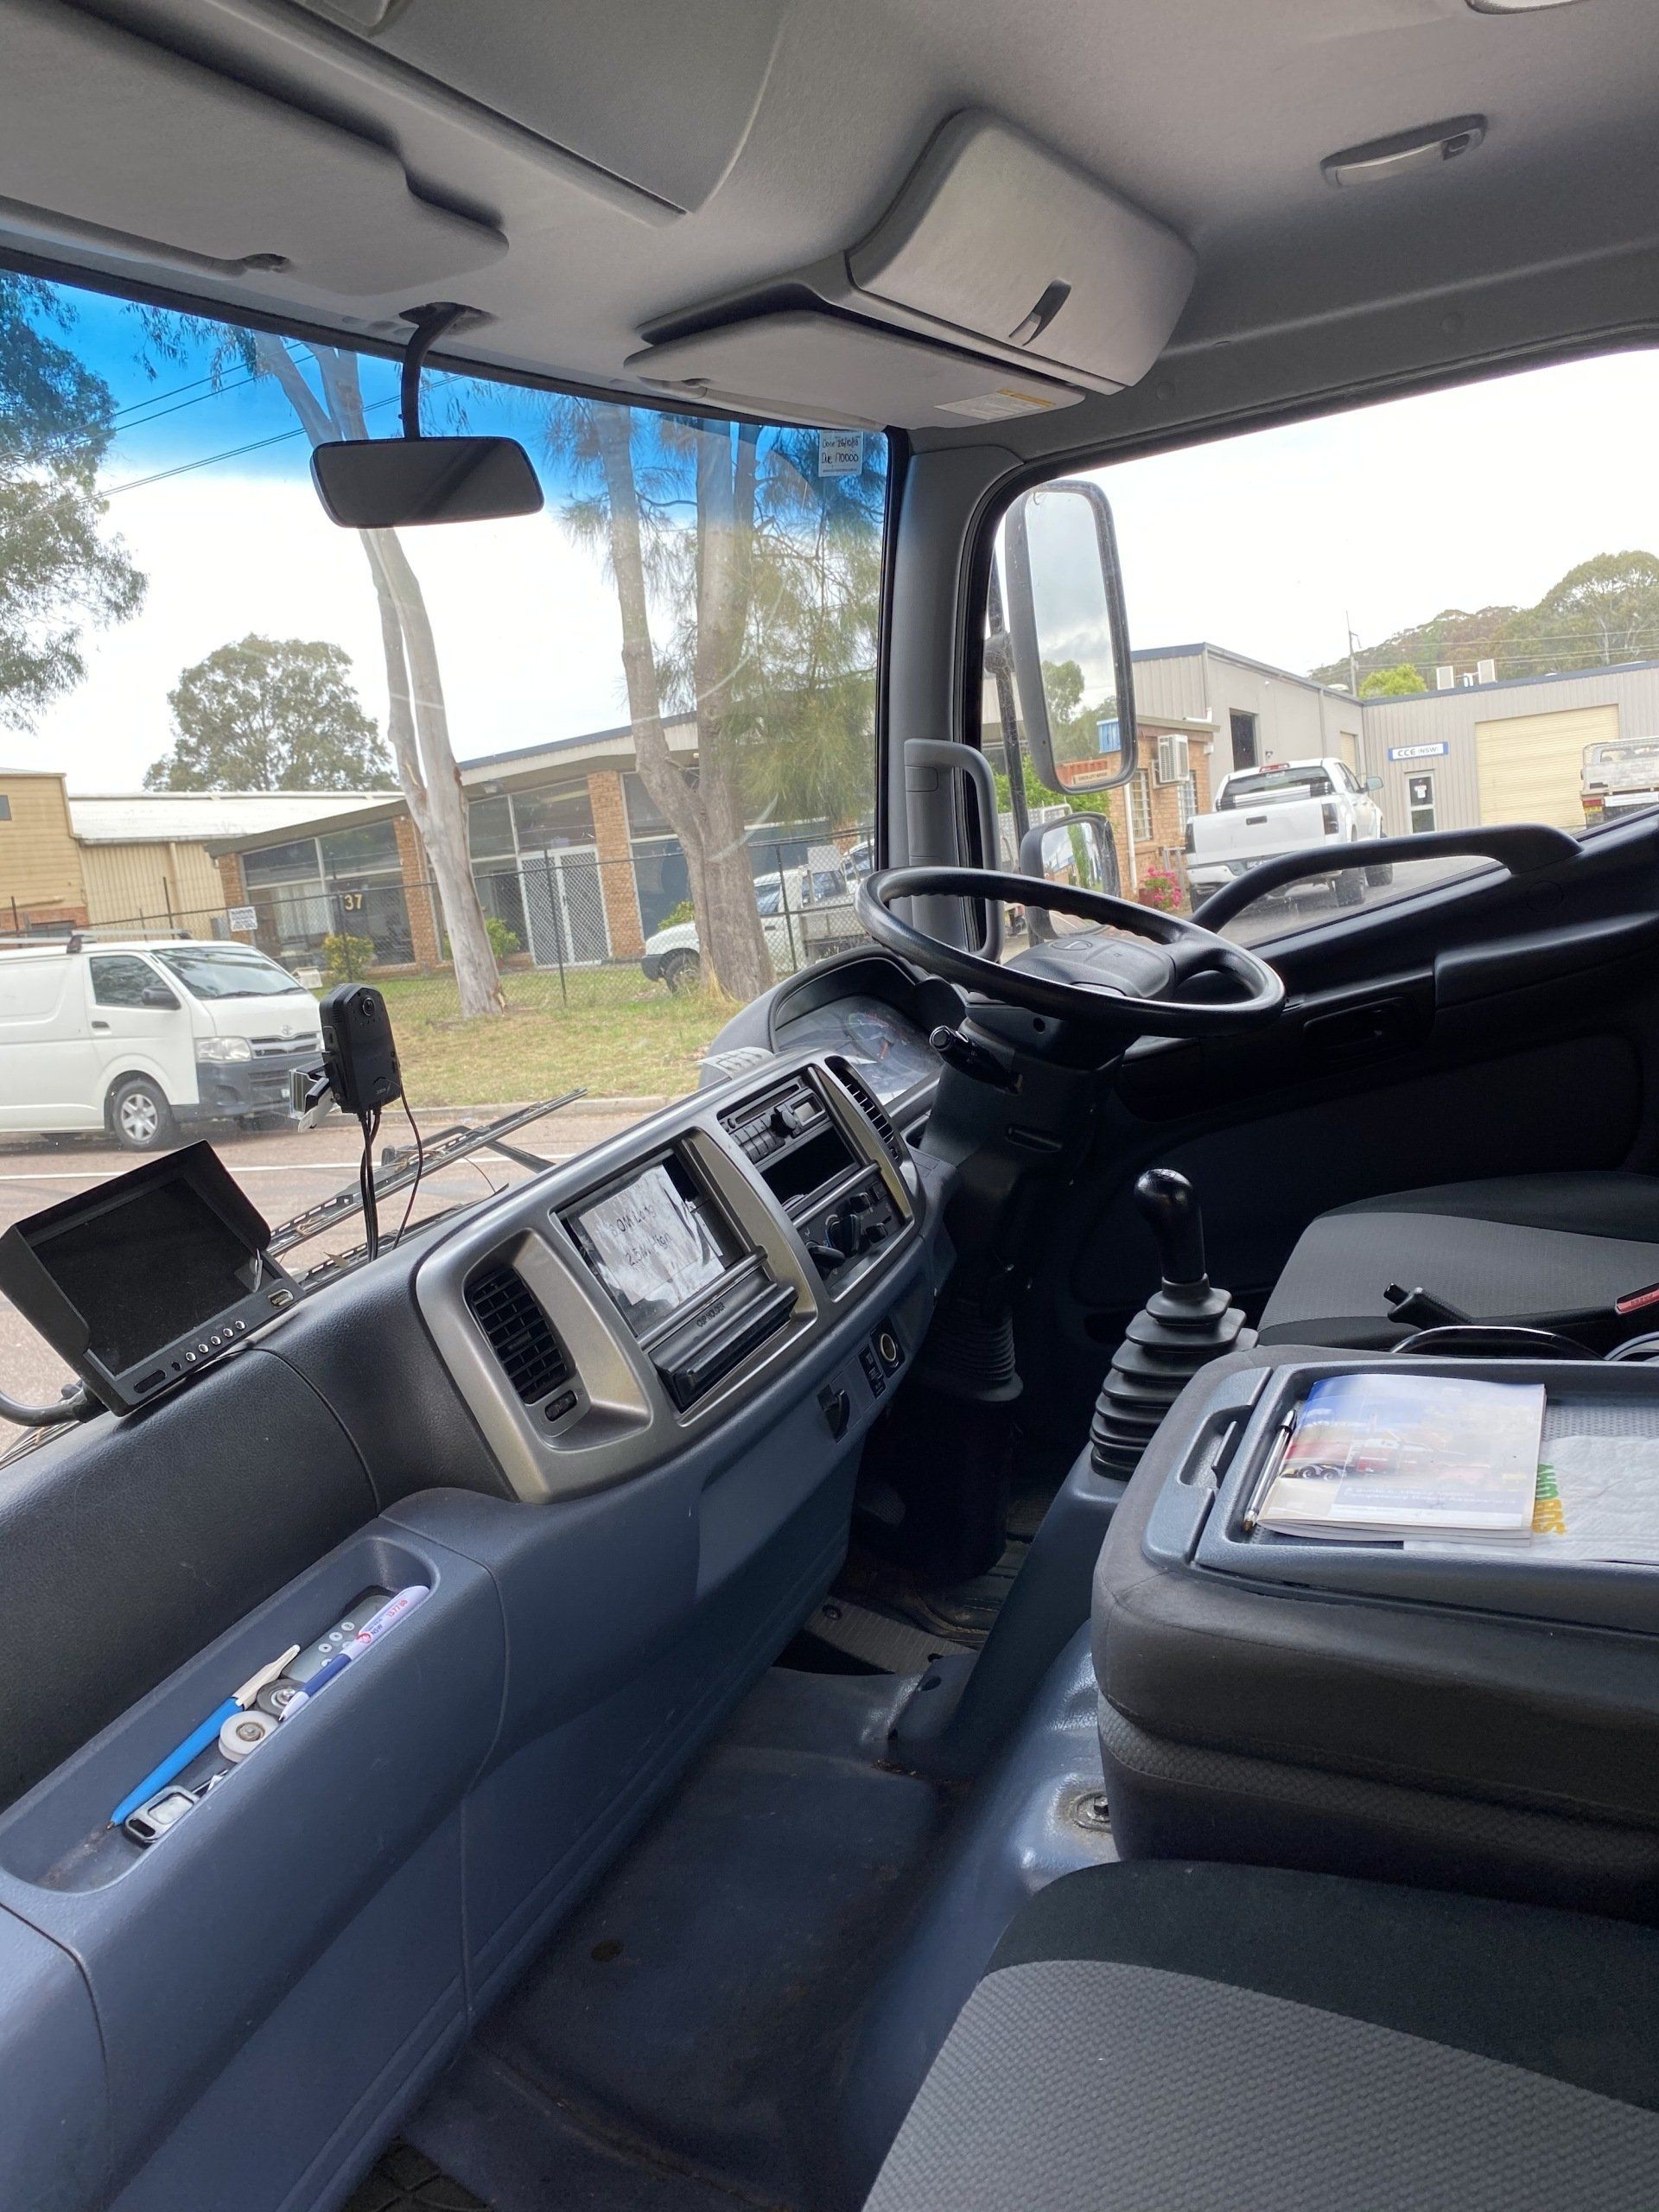 Inside the ABC Truck — ABC Driving School in Central Coast NSW